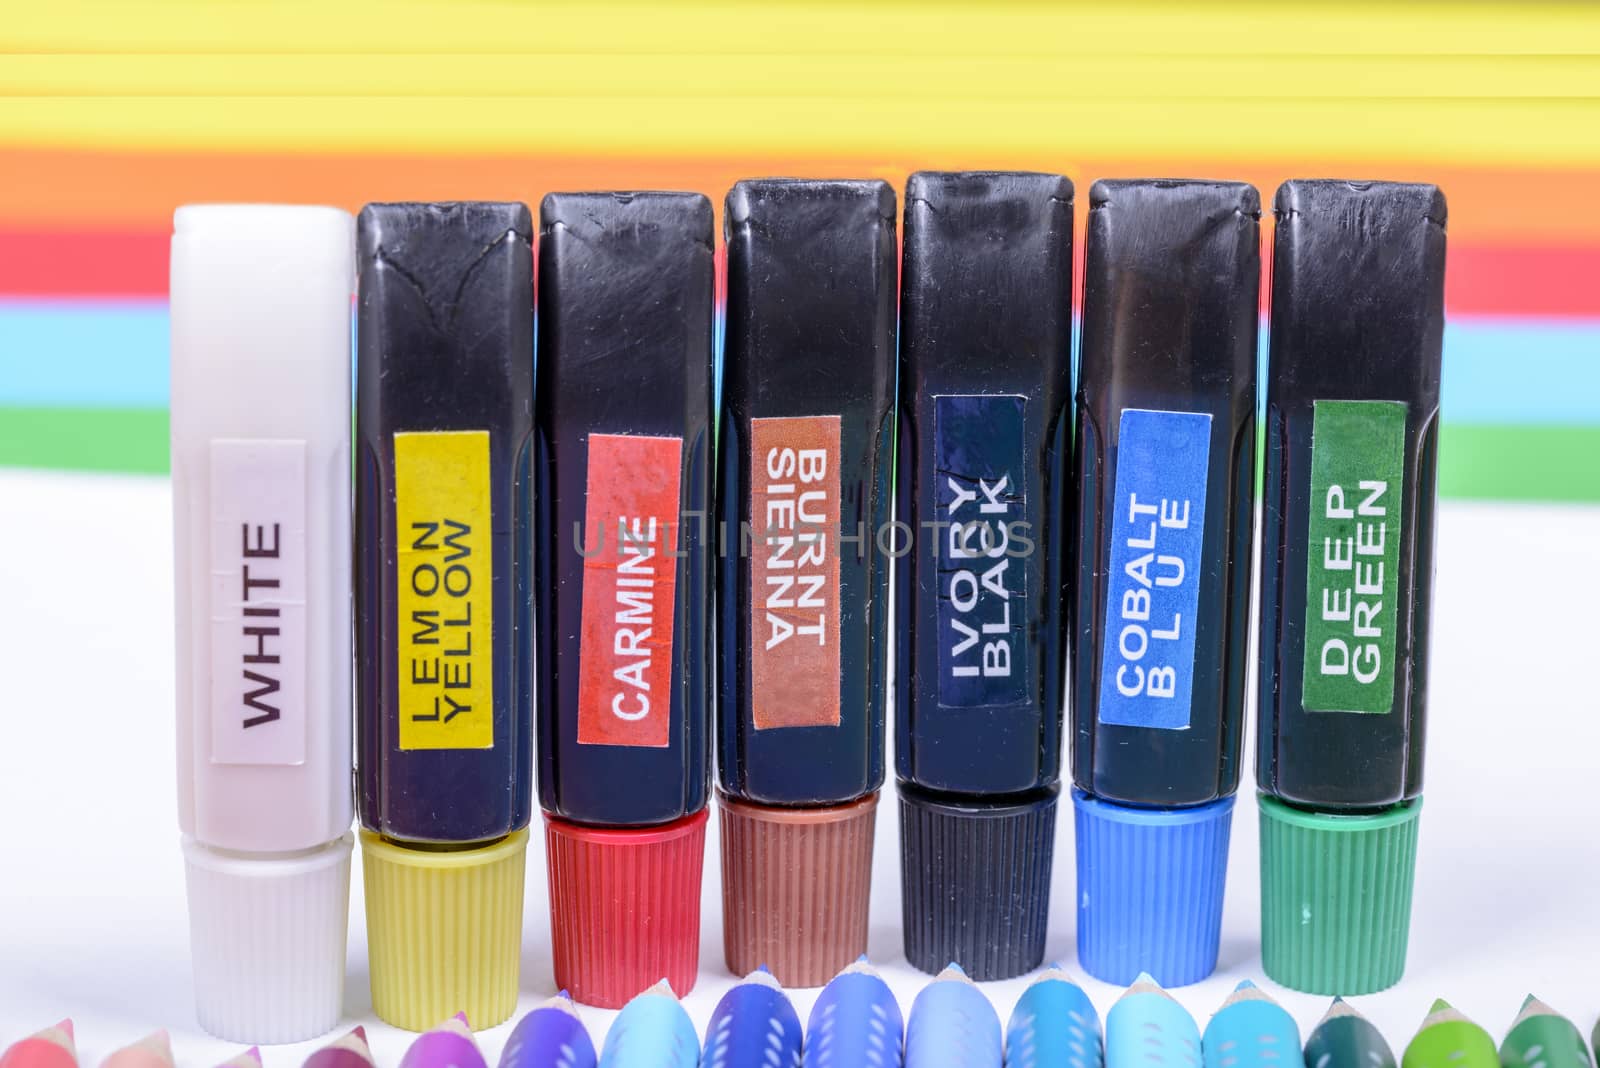 Bundle of colored pencils and tubes of paint on the colorful background